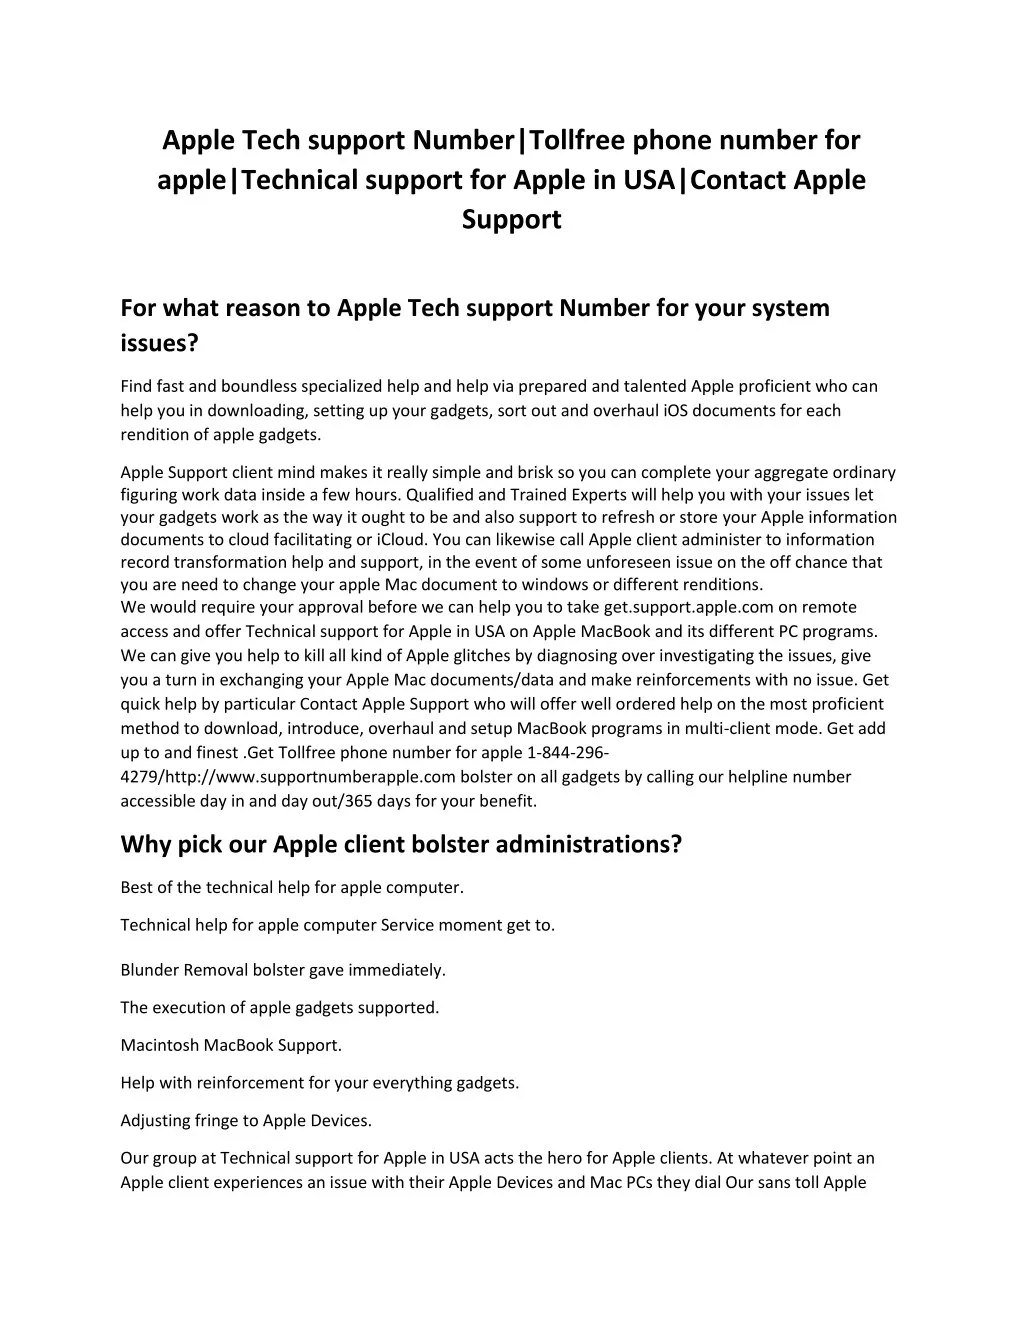 apple tech support number tollfree phone number n.